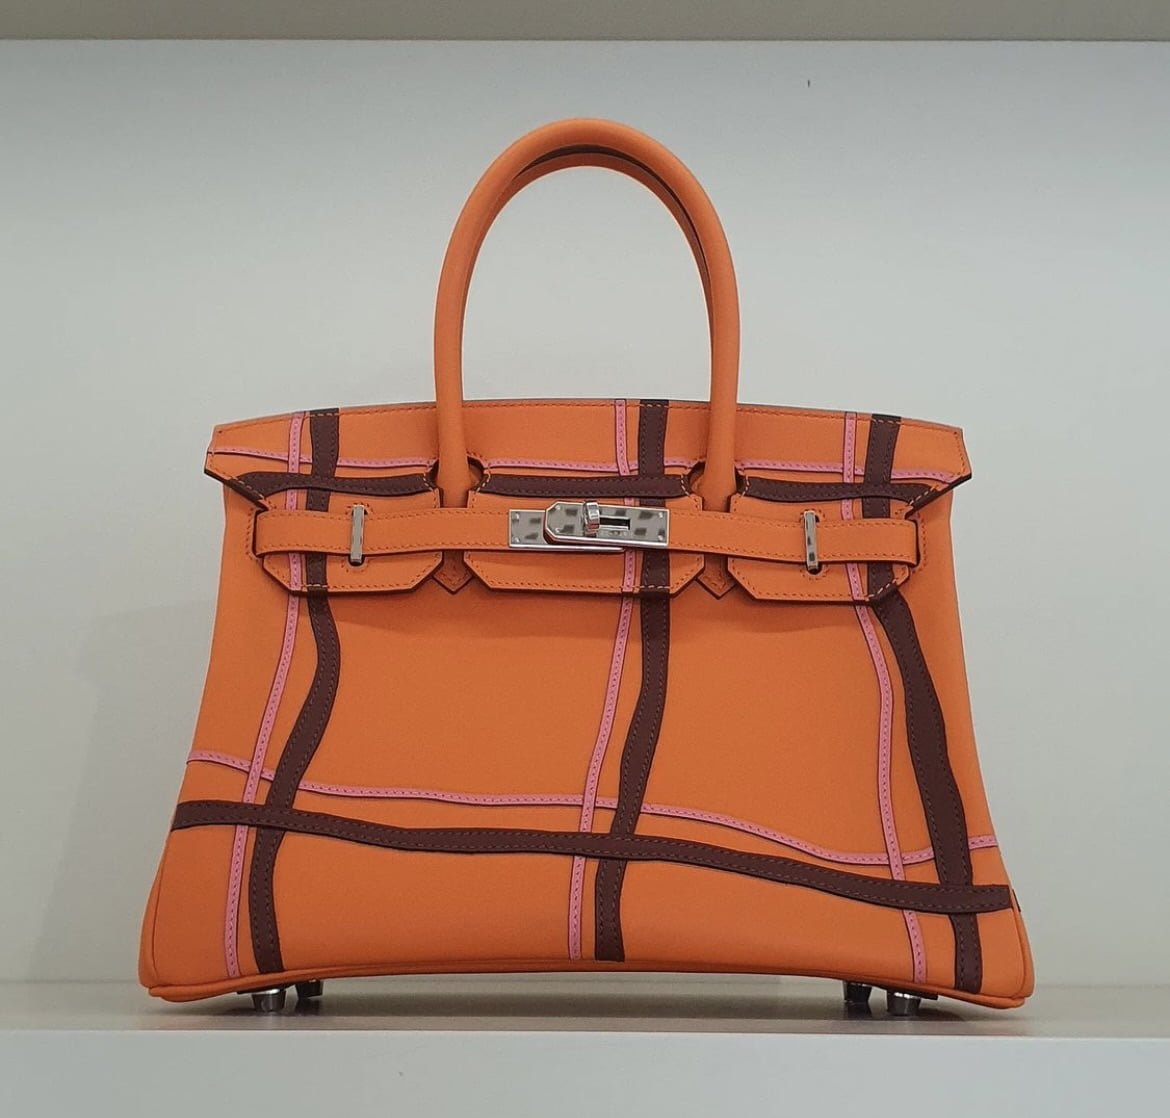 Hermès Birkin Prices In 2023: Here's What All The Models Cost